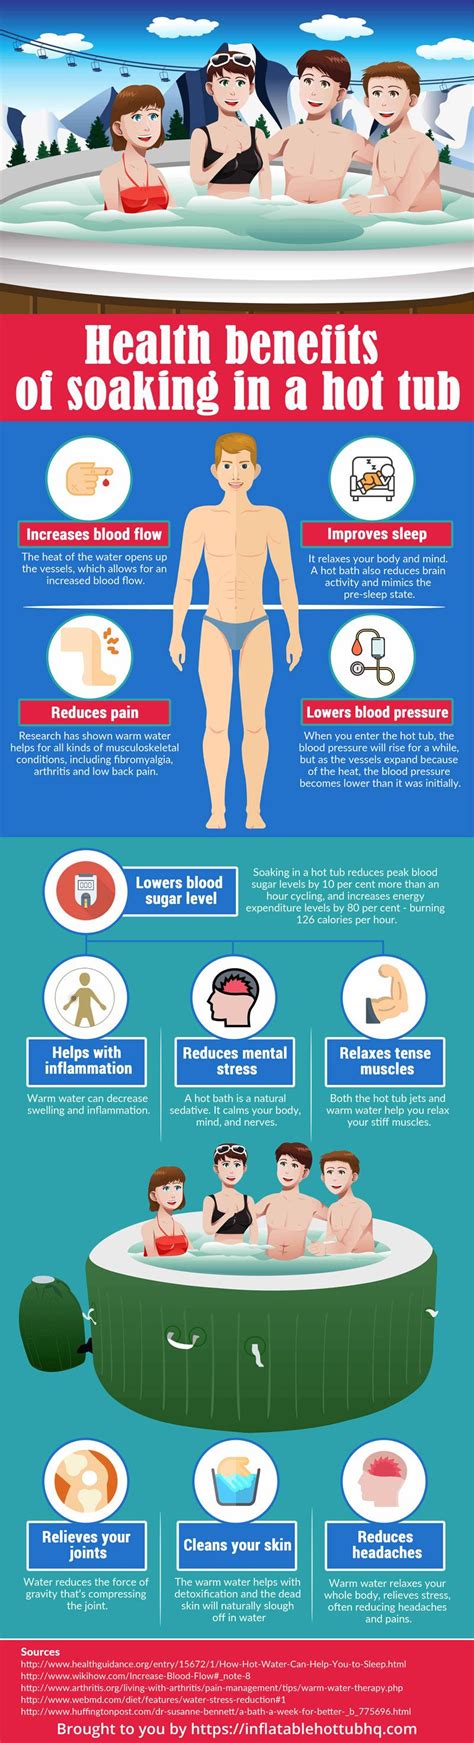 11 Health Benefits Of Soaking In A Hot Tub Infographic Health Health